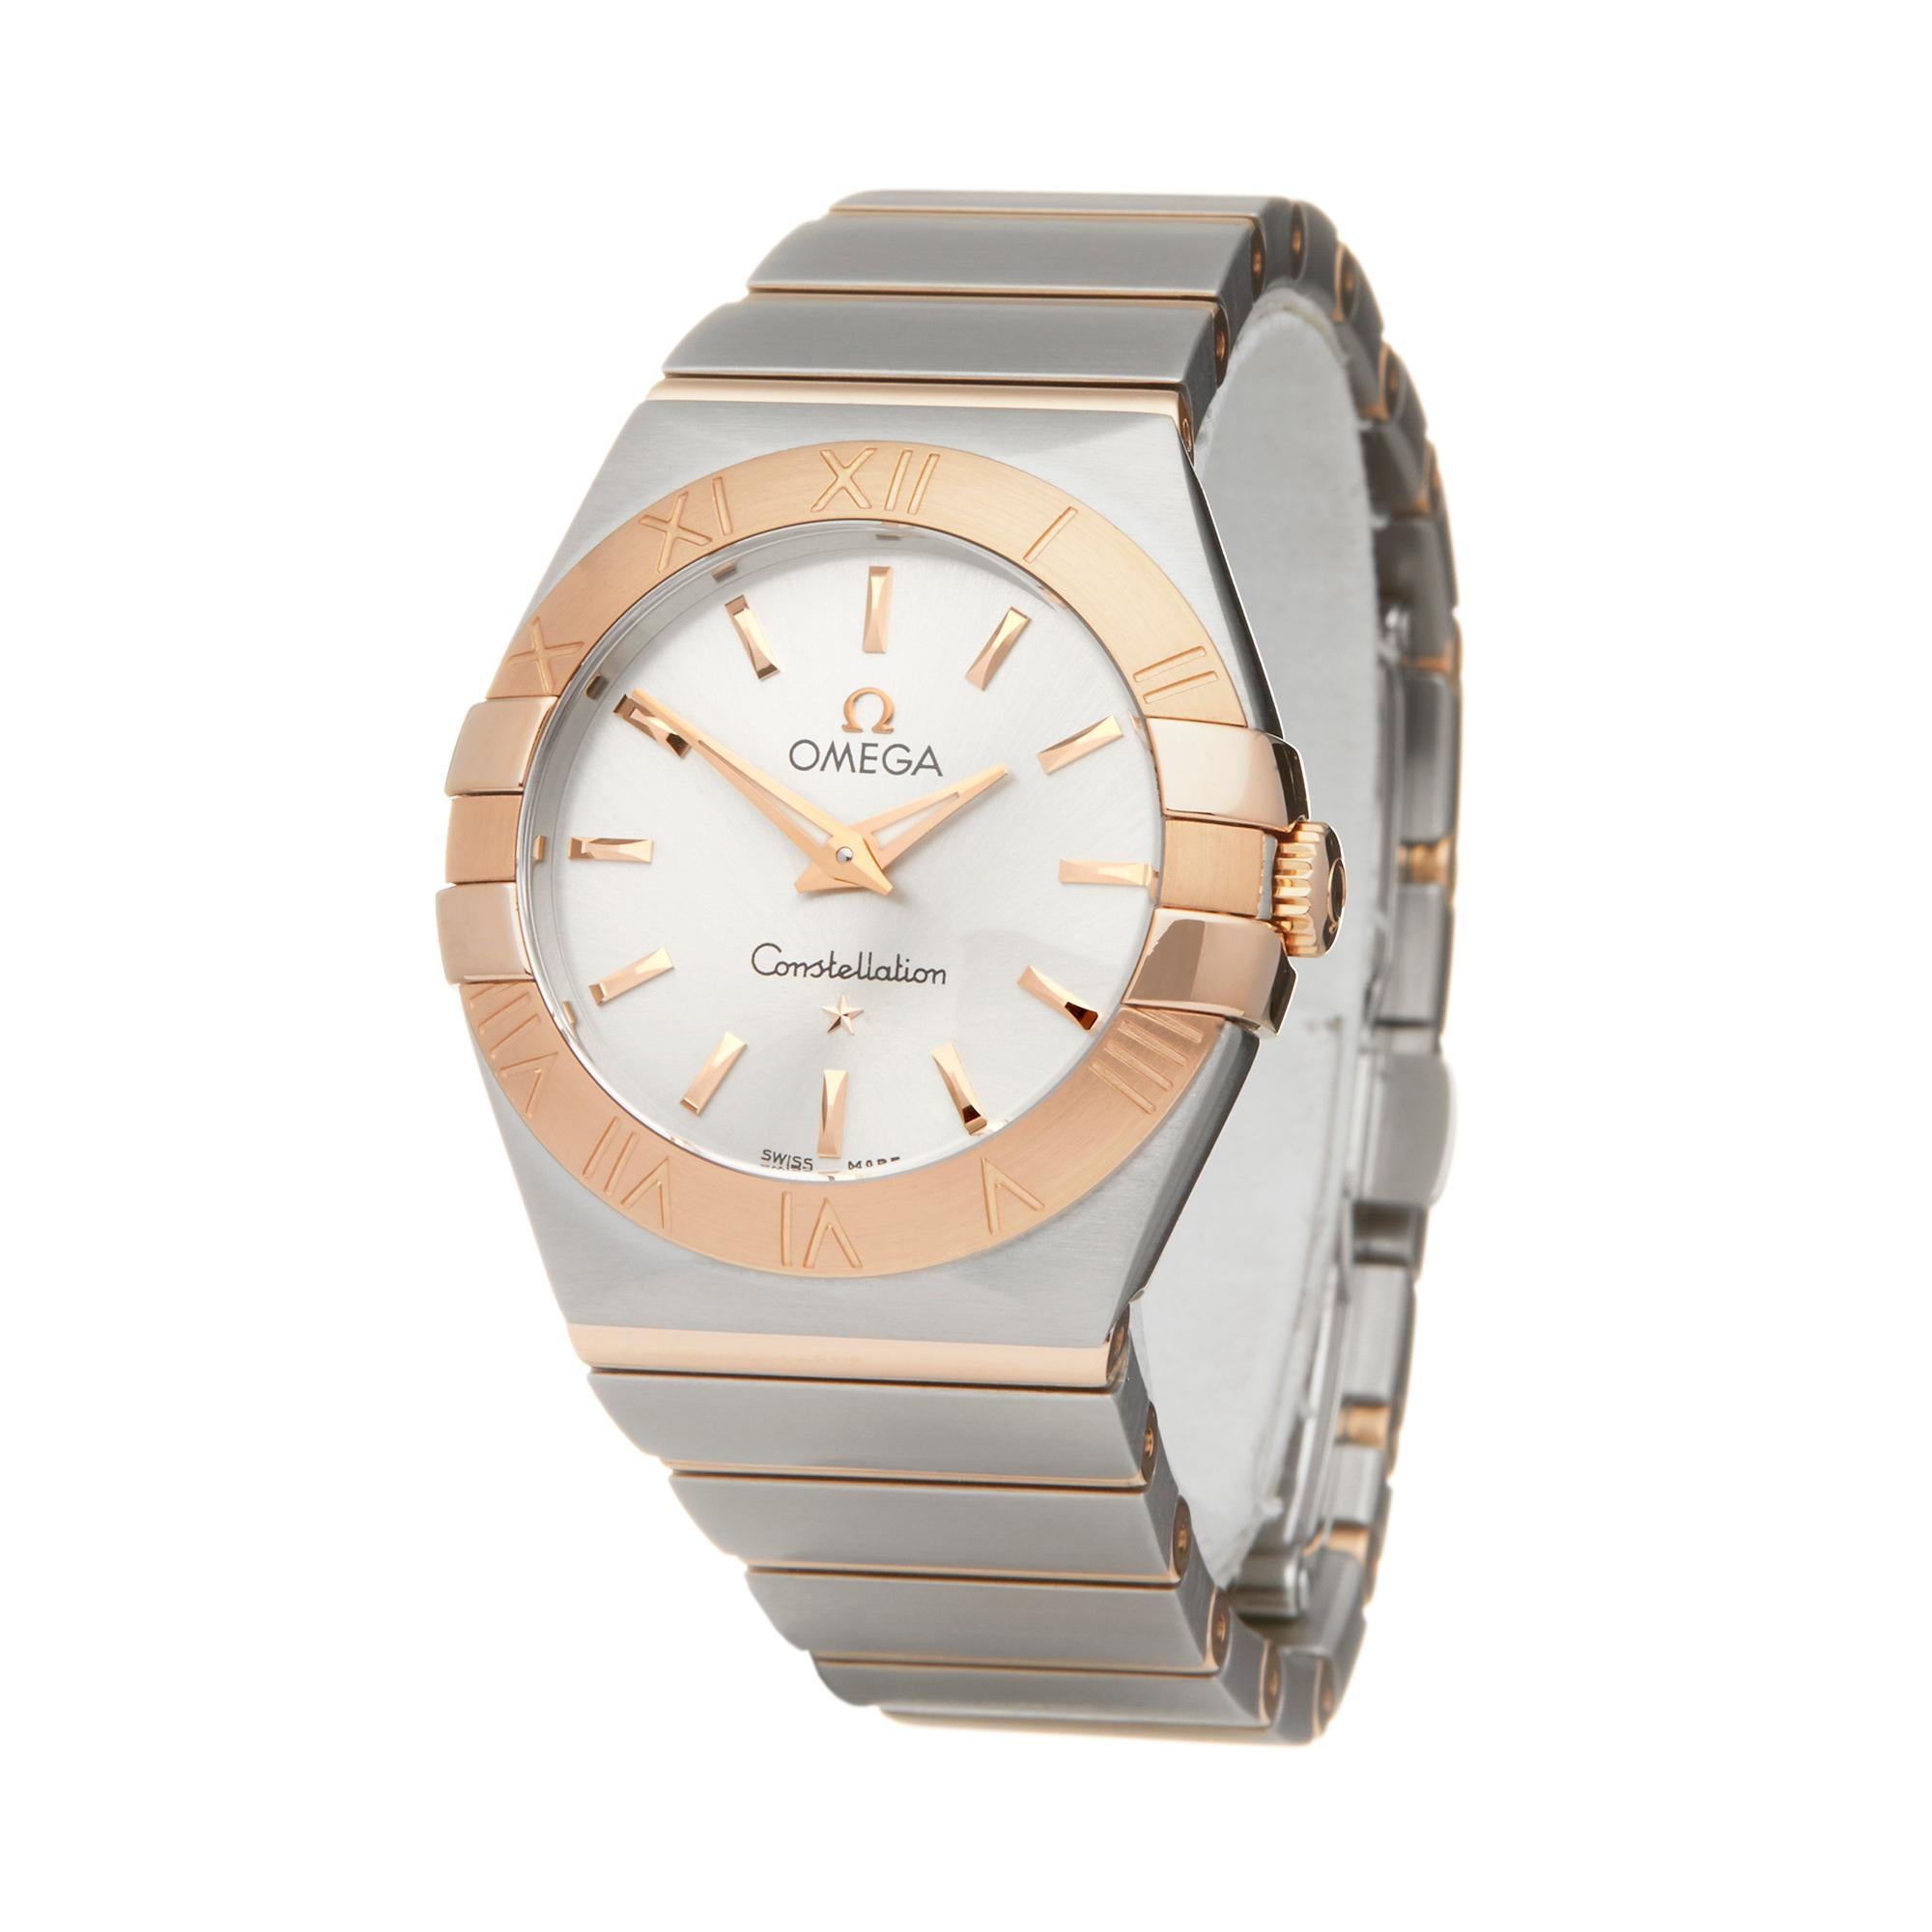 Reference: W6007
Manufacturer: Omega
Model: Constellation
Model Reference: 123.20.27.60.02.004
Age: Circa 2010's
Gender: Women's
Box and Papers: Box Only
Dial: Silver Baton
Glass: Sapphire Crystal
Movement: Quartz
Water Resistance: To Manufacturers